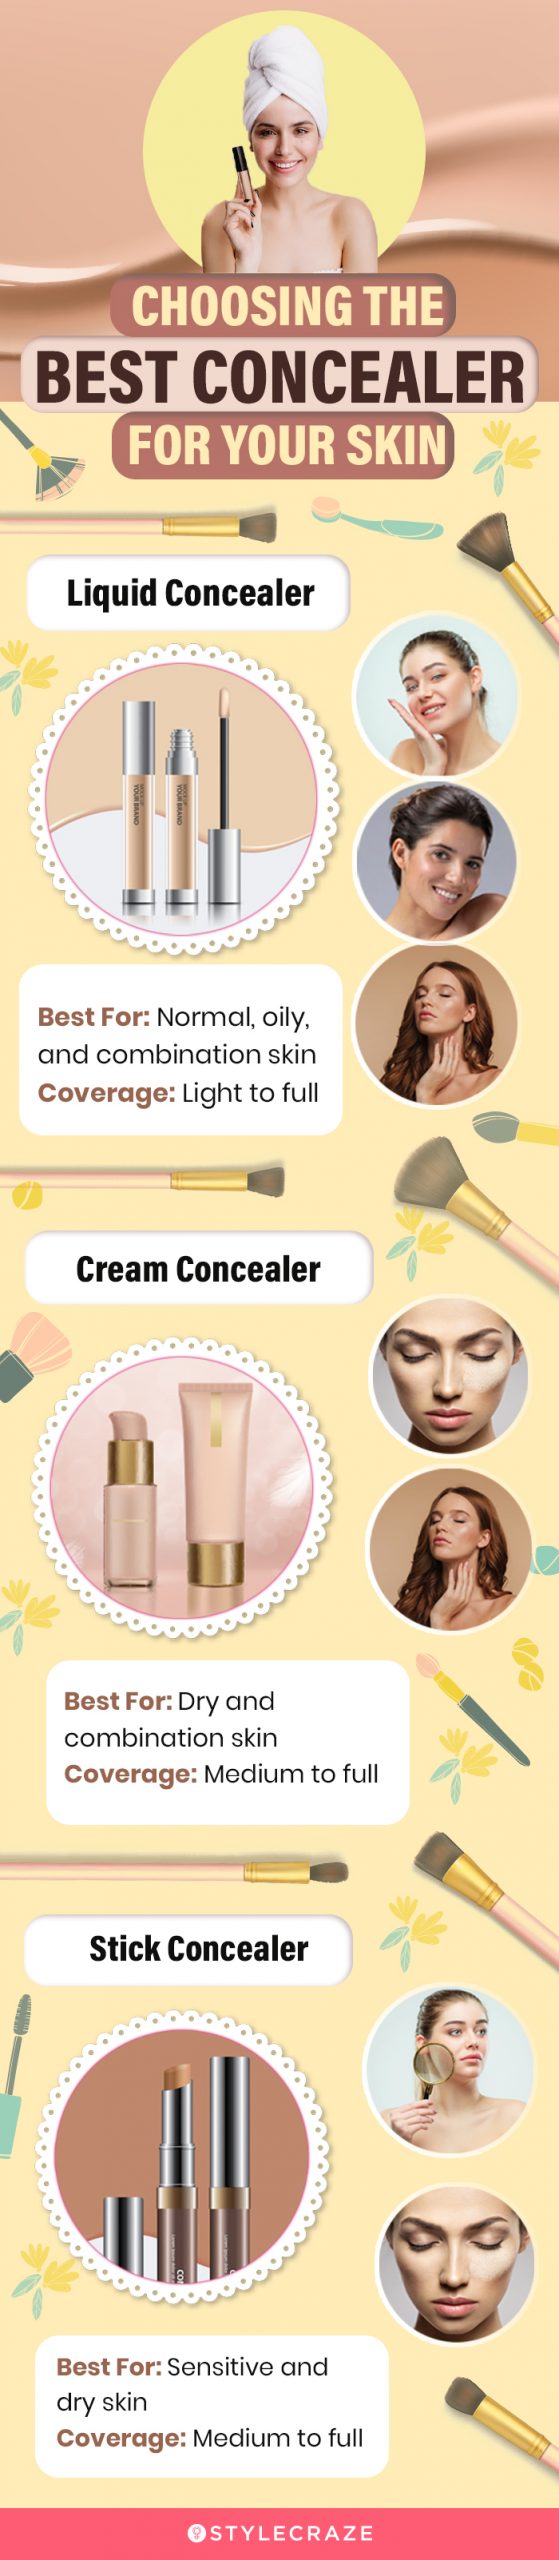 choosing the best concealer for your skin (infographic)